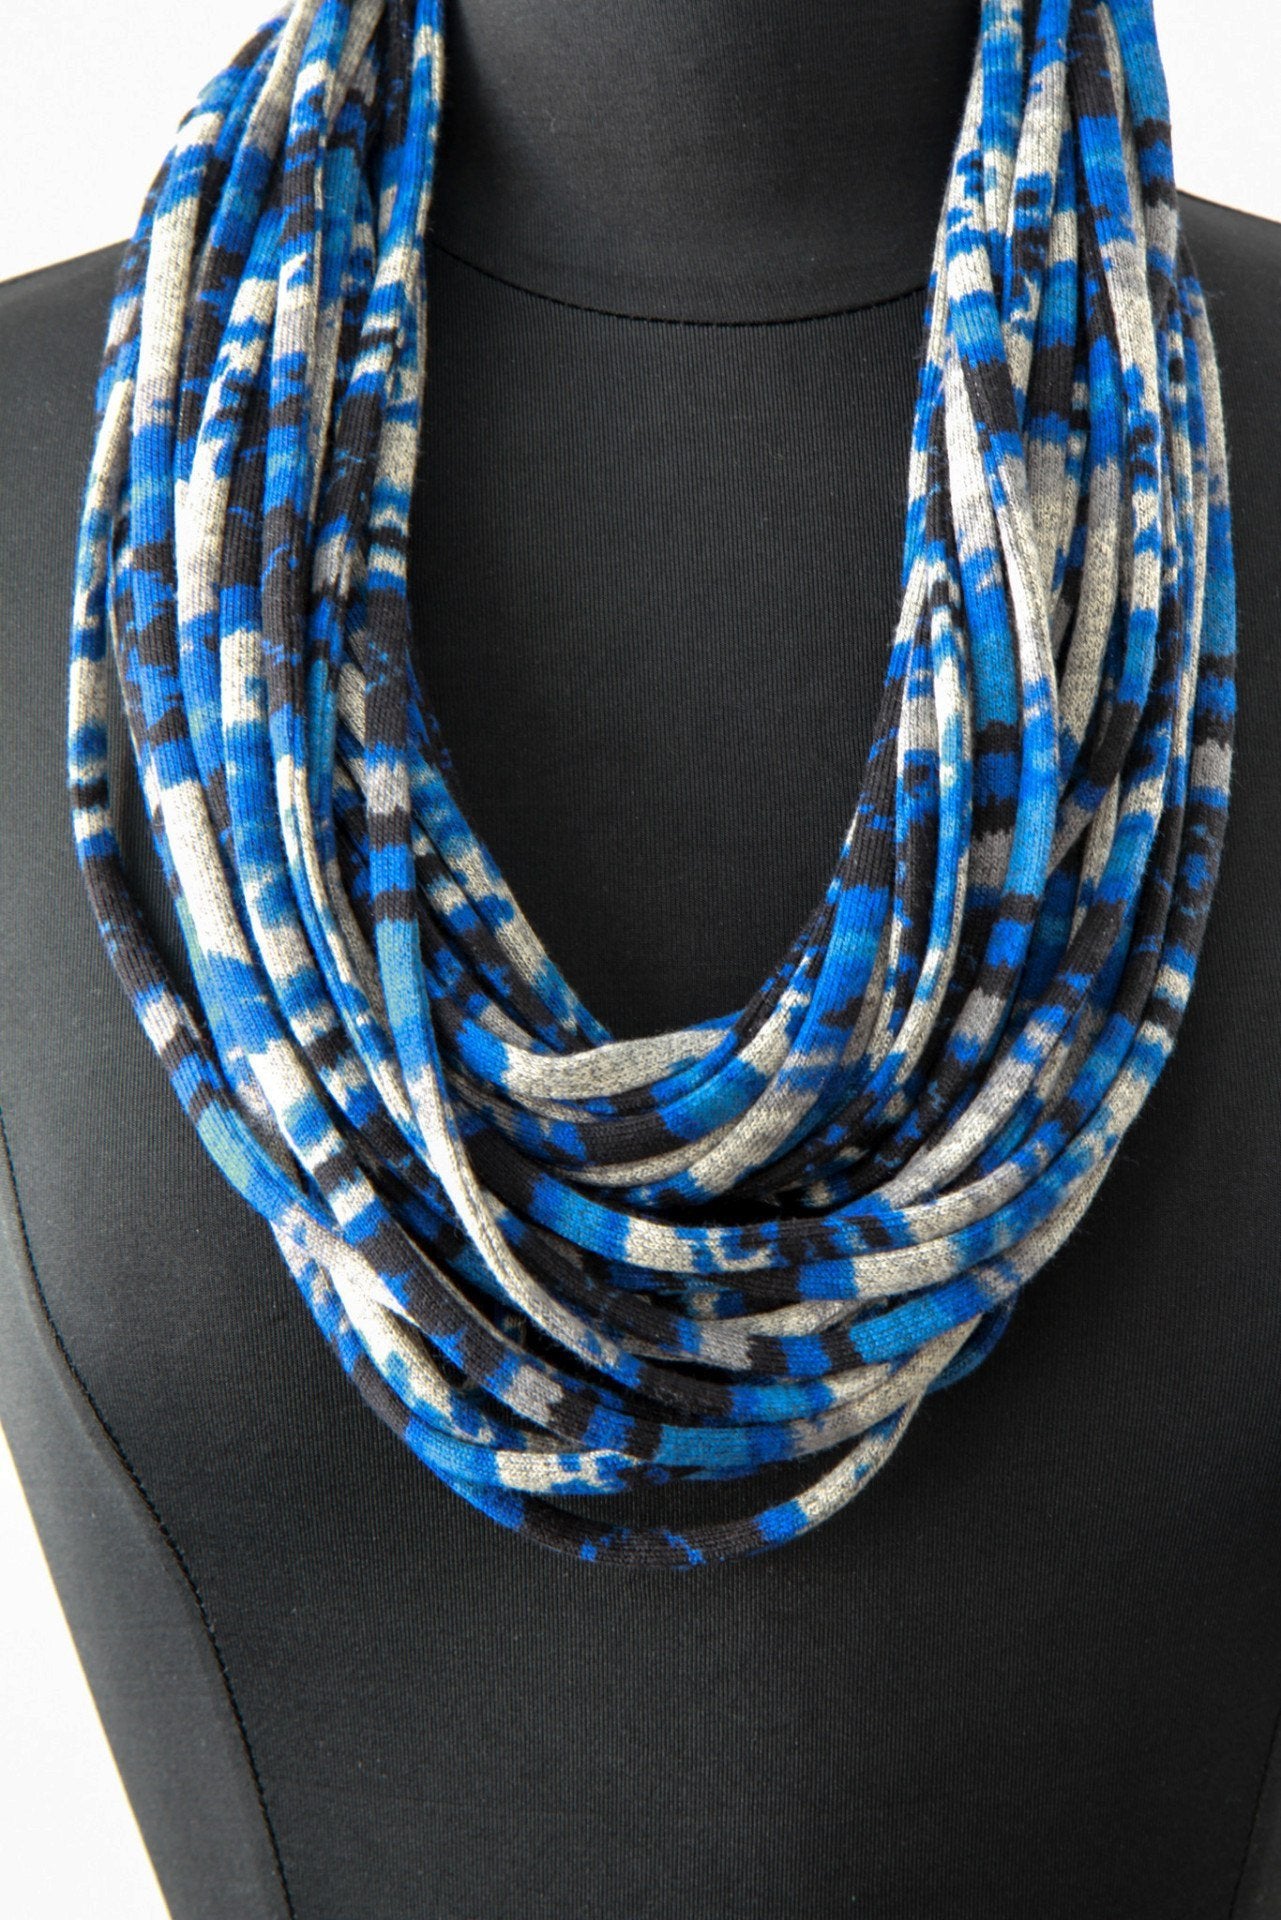 Dark Blue and Grey Graphic Print Infinity Scarf for Men or Women. Made in Canada